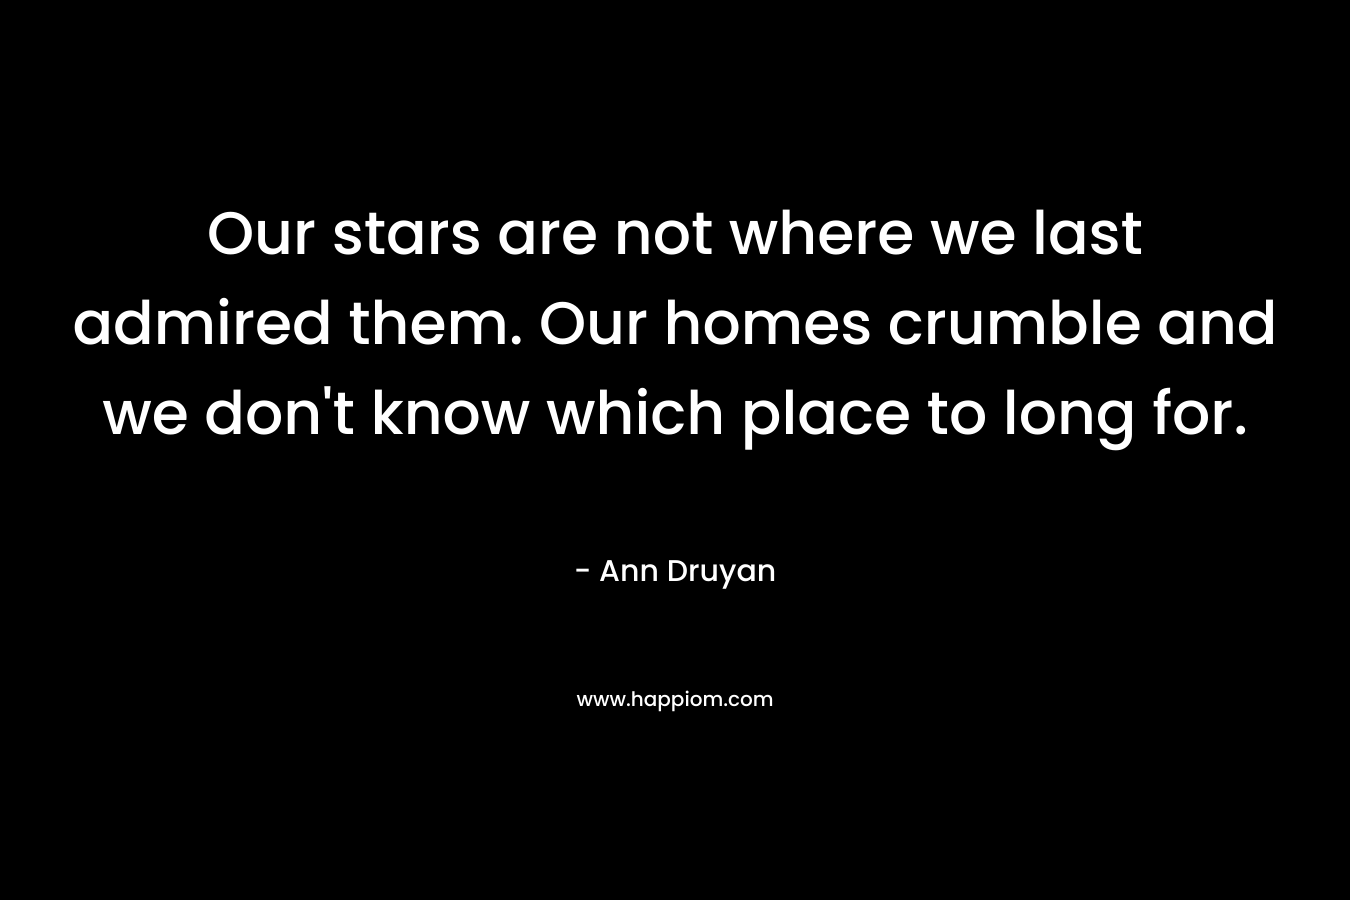 Our stars are not where we last admired them. Our homes crumble and we don’t know which place to long for. – Ann Druyan